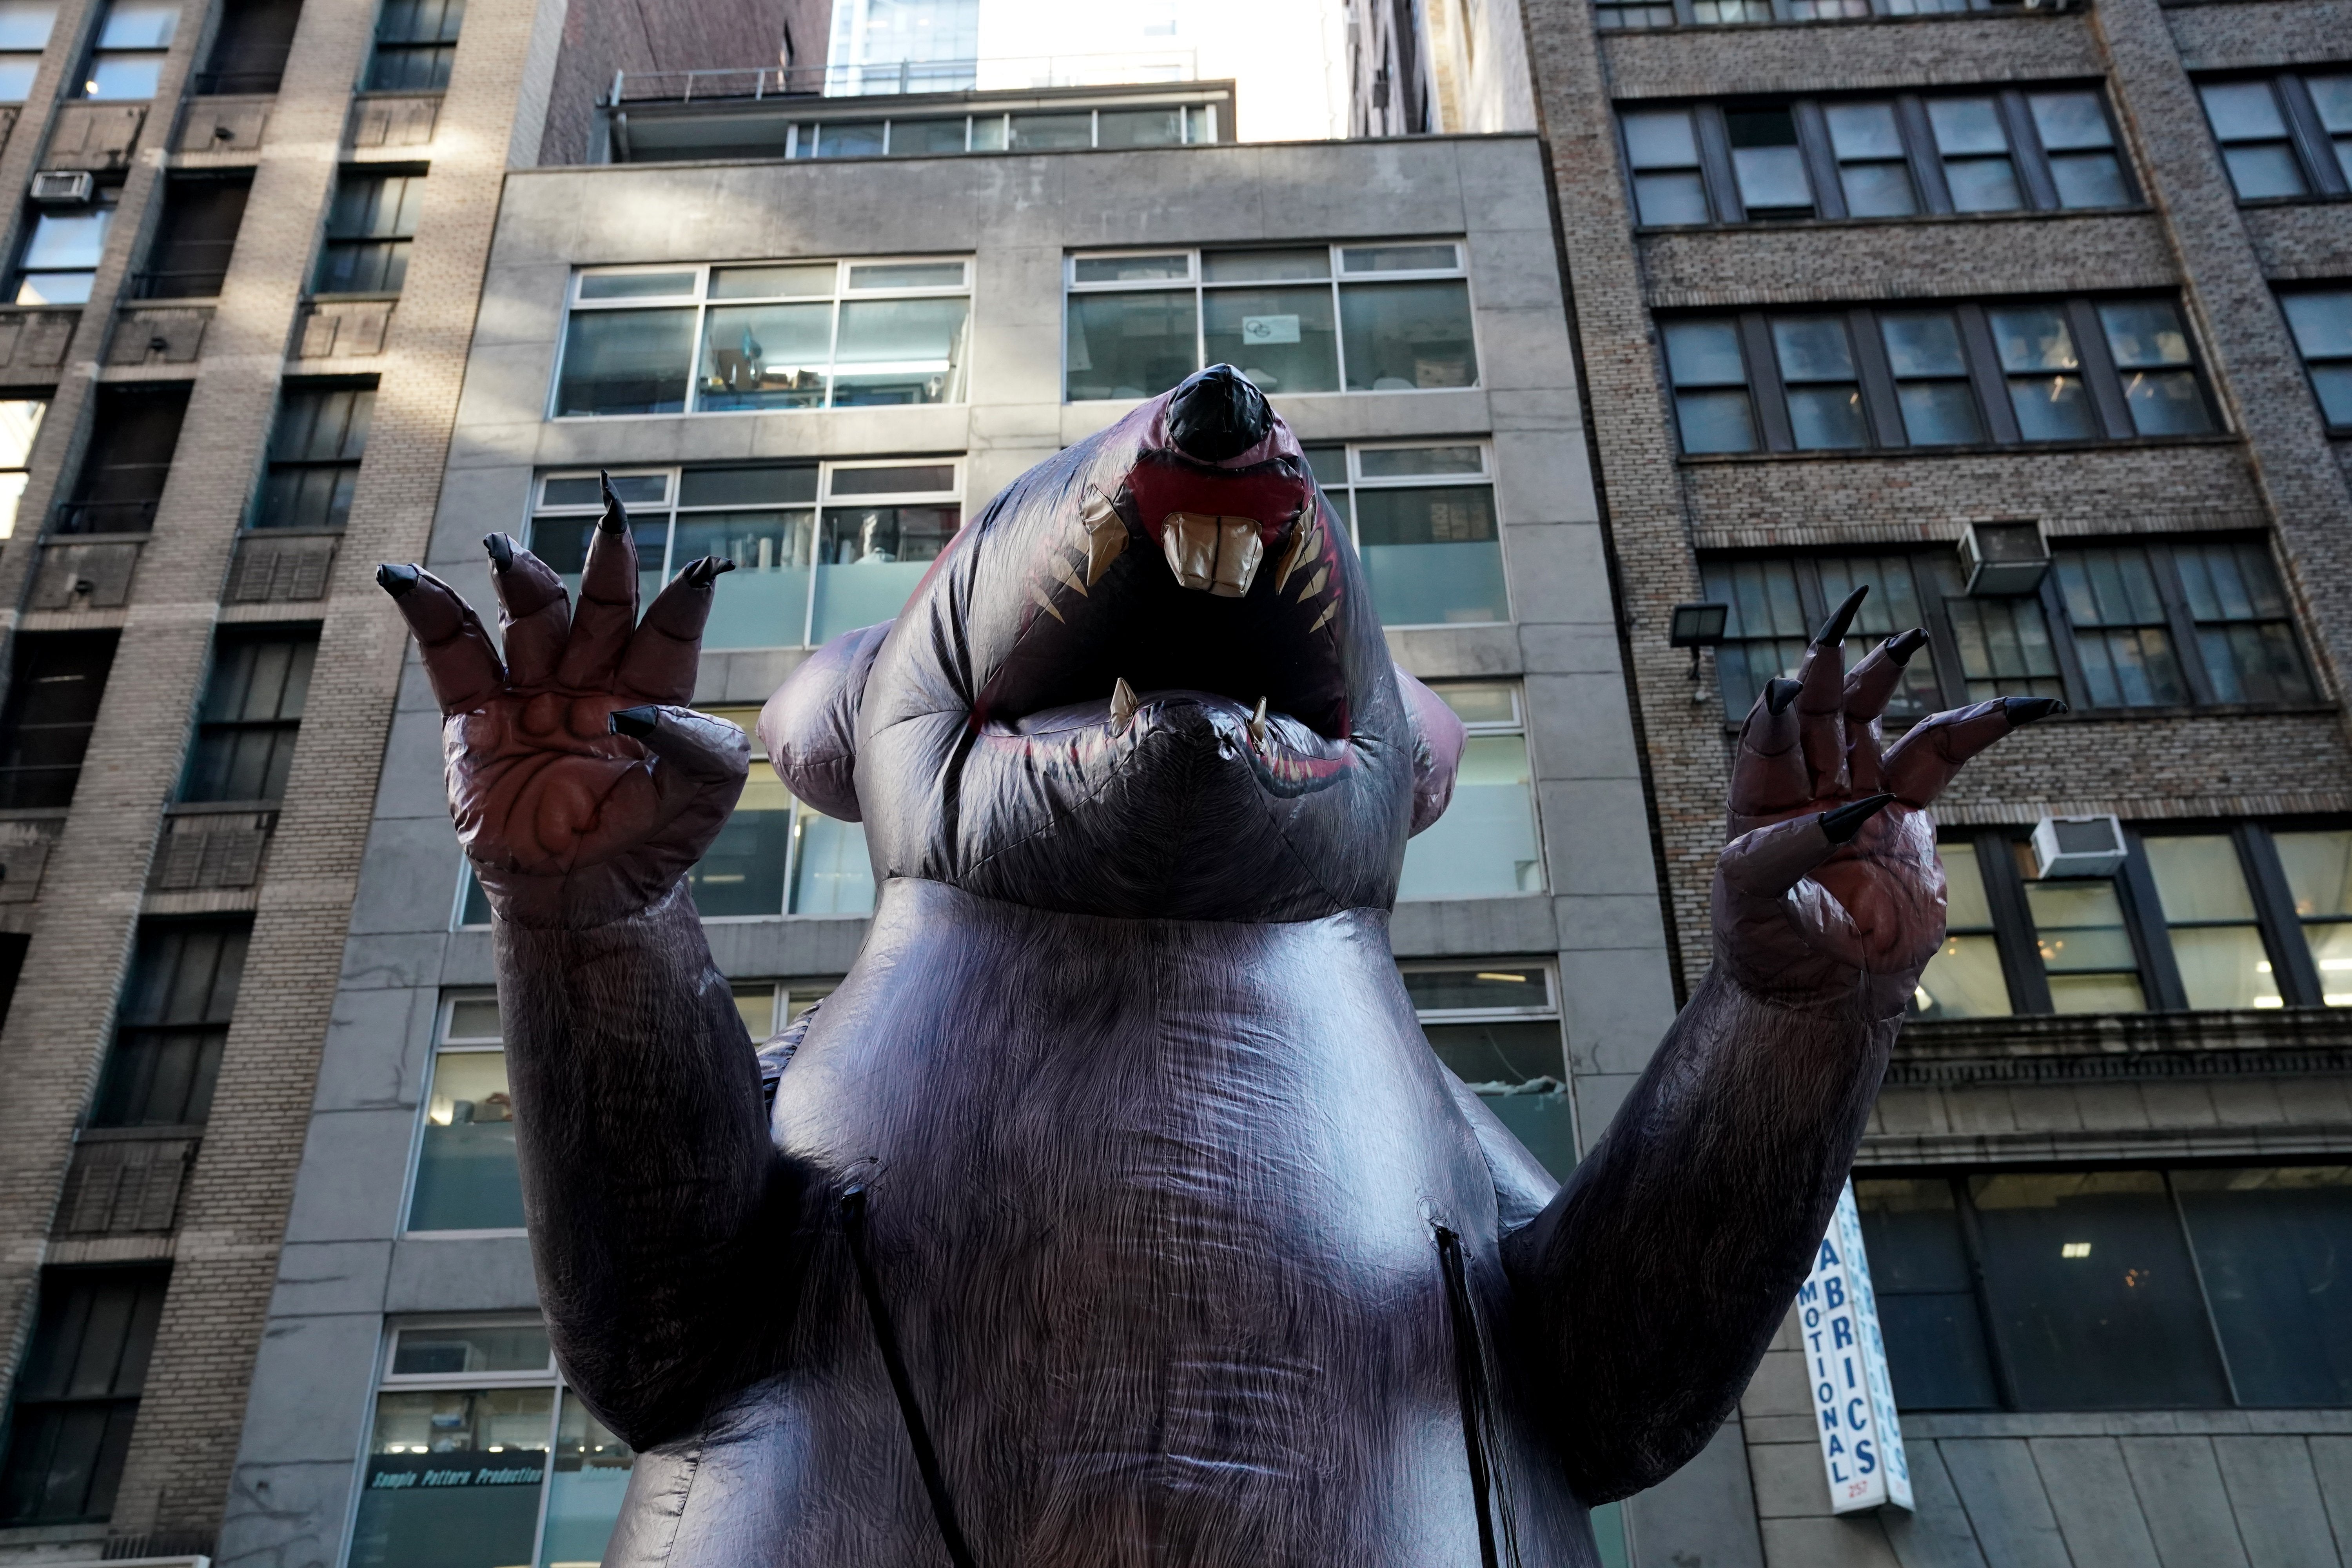 Giant inflatable rats ubiquitous at work sites with labour disputes survived a Trump-era legal challenge at the National Labor Relations Board on 21 July.